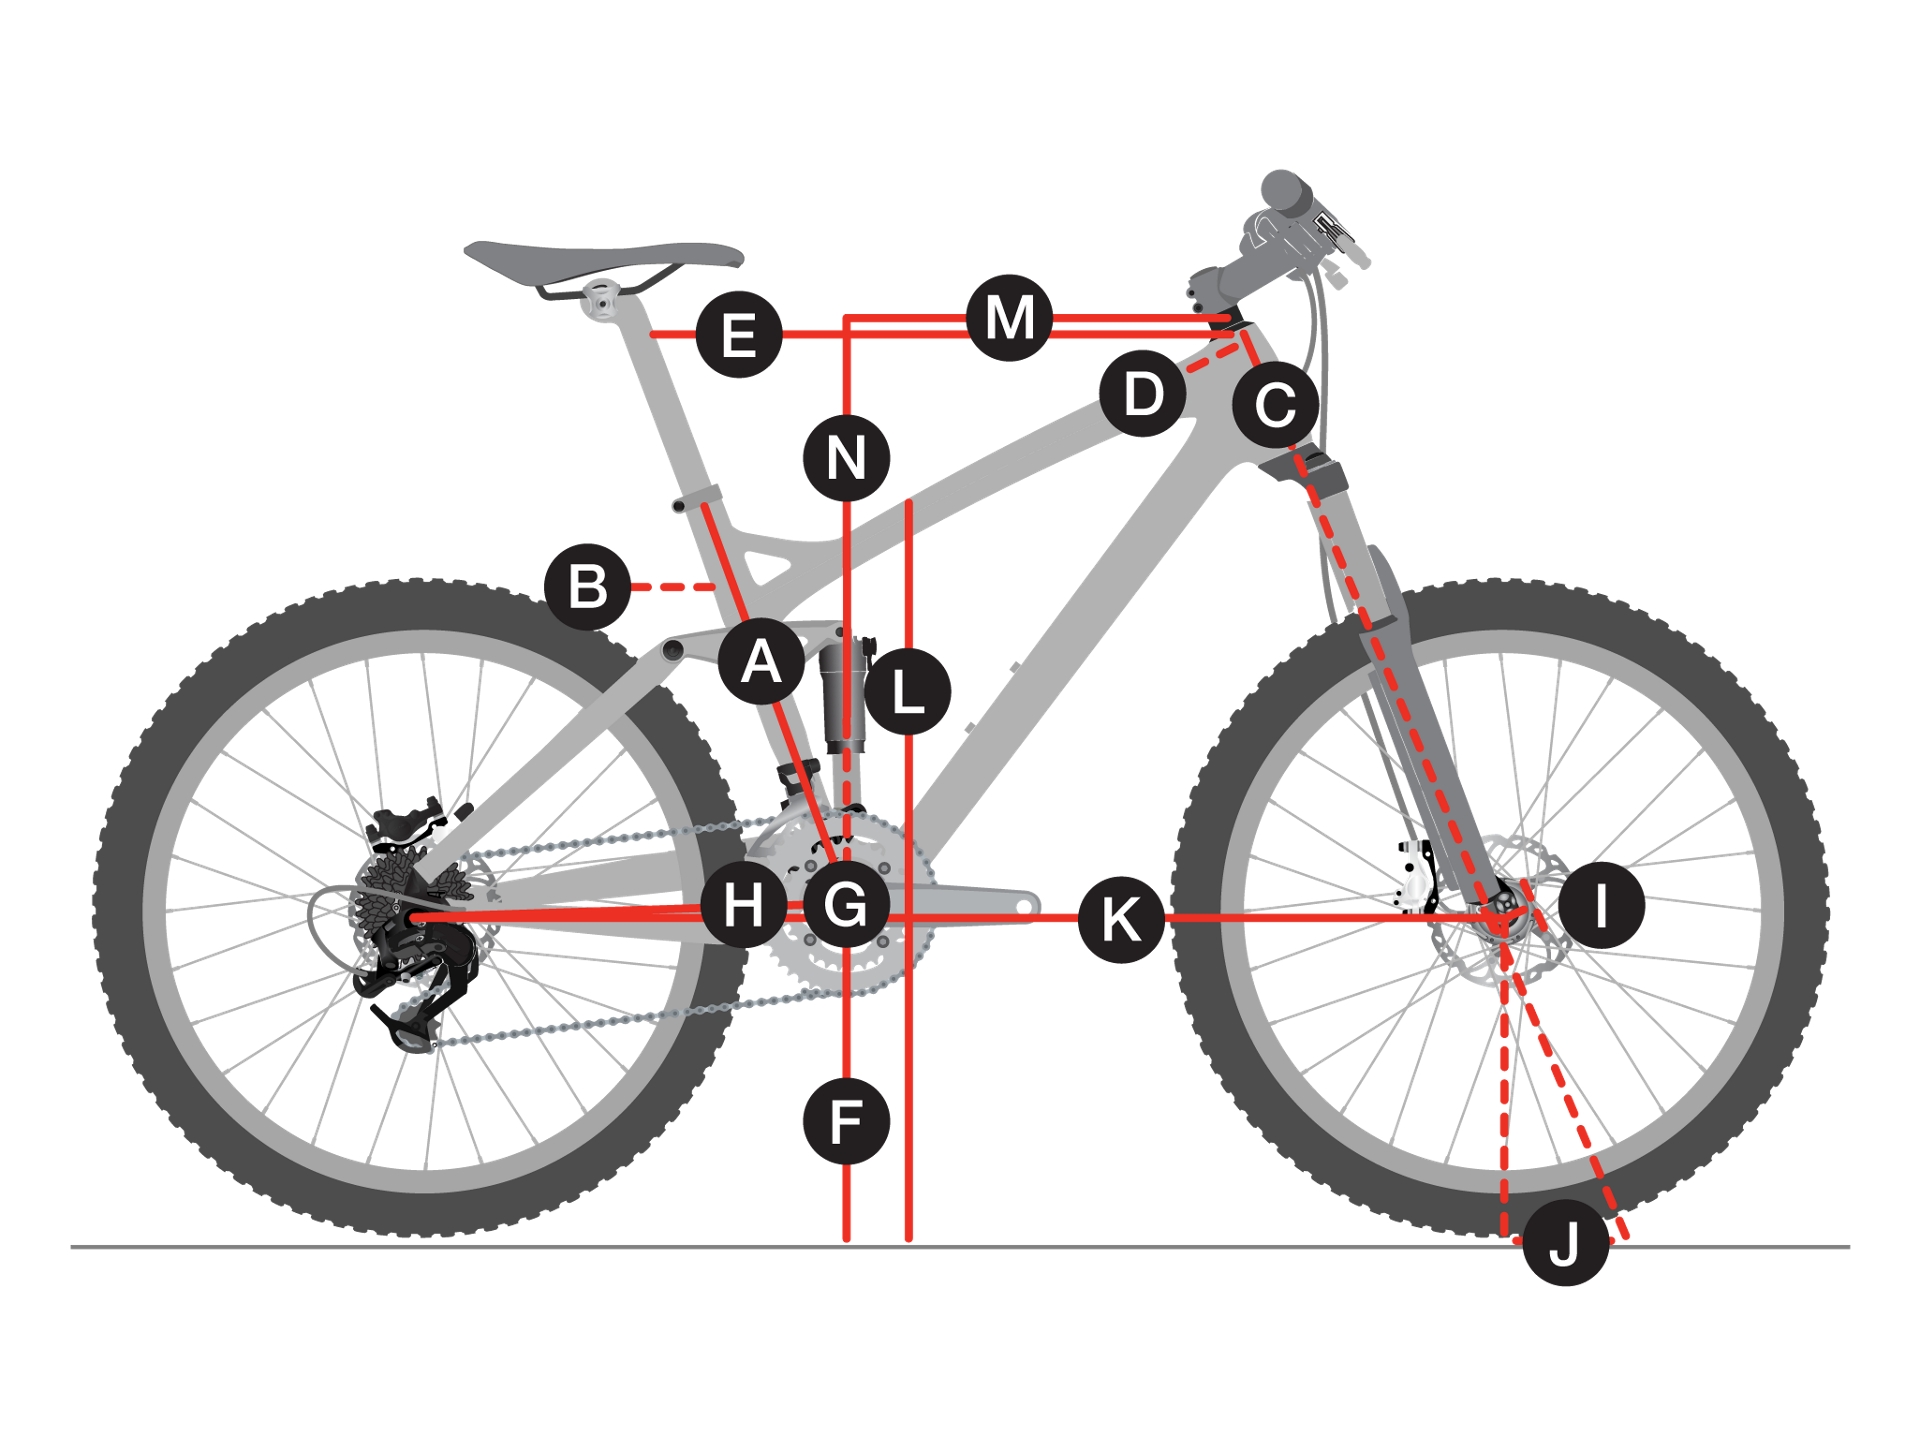 Geometry 14793 MTB FS?$responsive pjpg$&cache=on,on&wid=1920&hei=1440&fit=fit,1